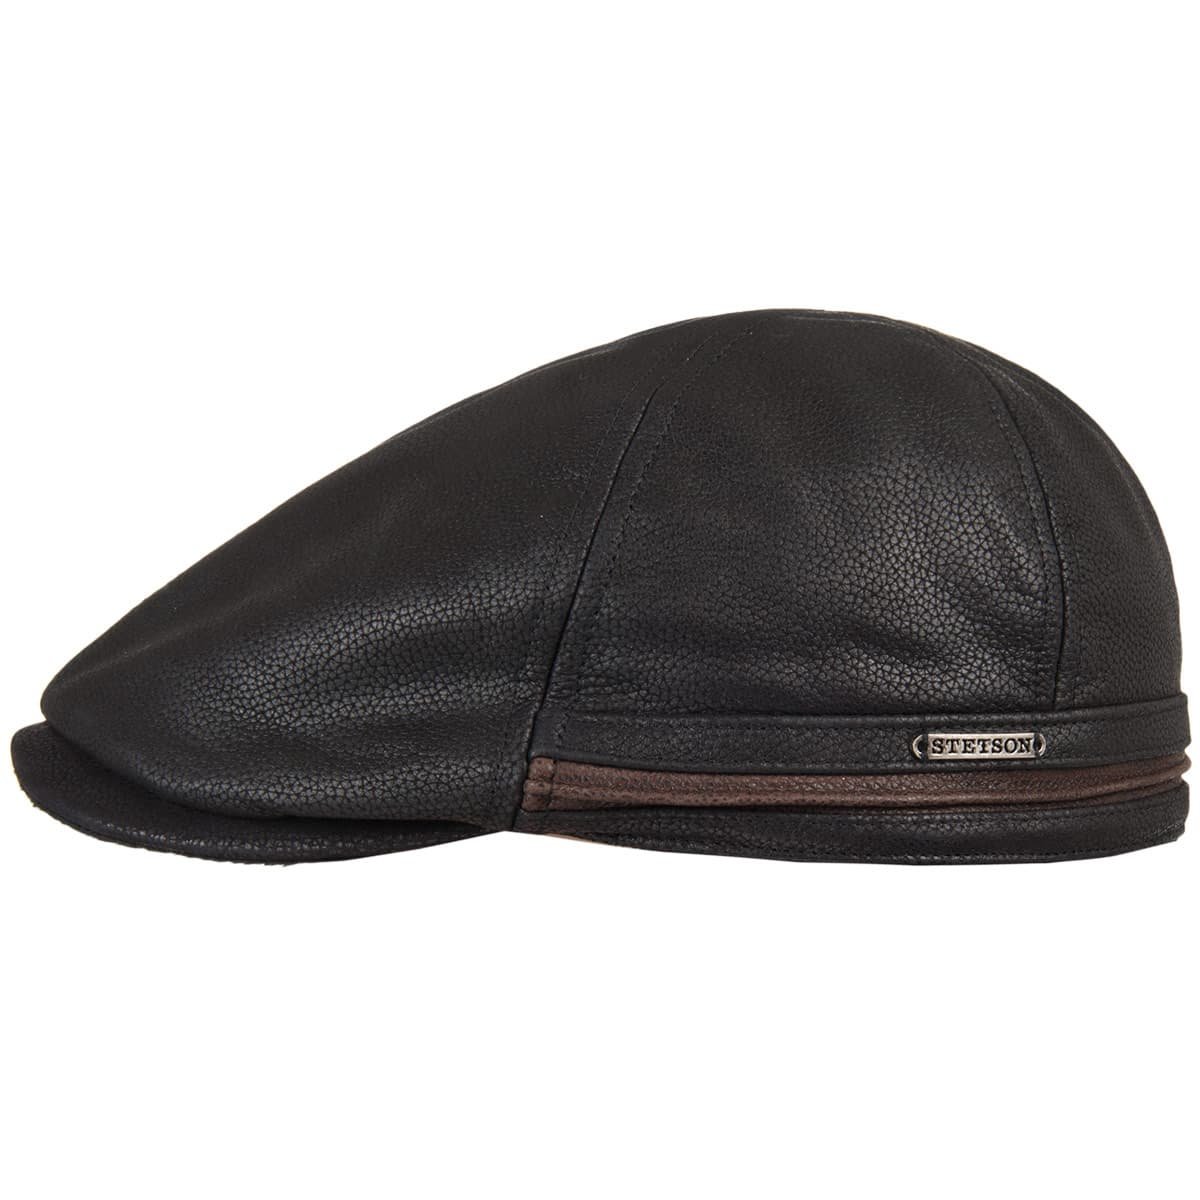 Redding flat cap by --> Online Hatshop for hats, caps, gloves and scarfs